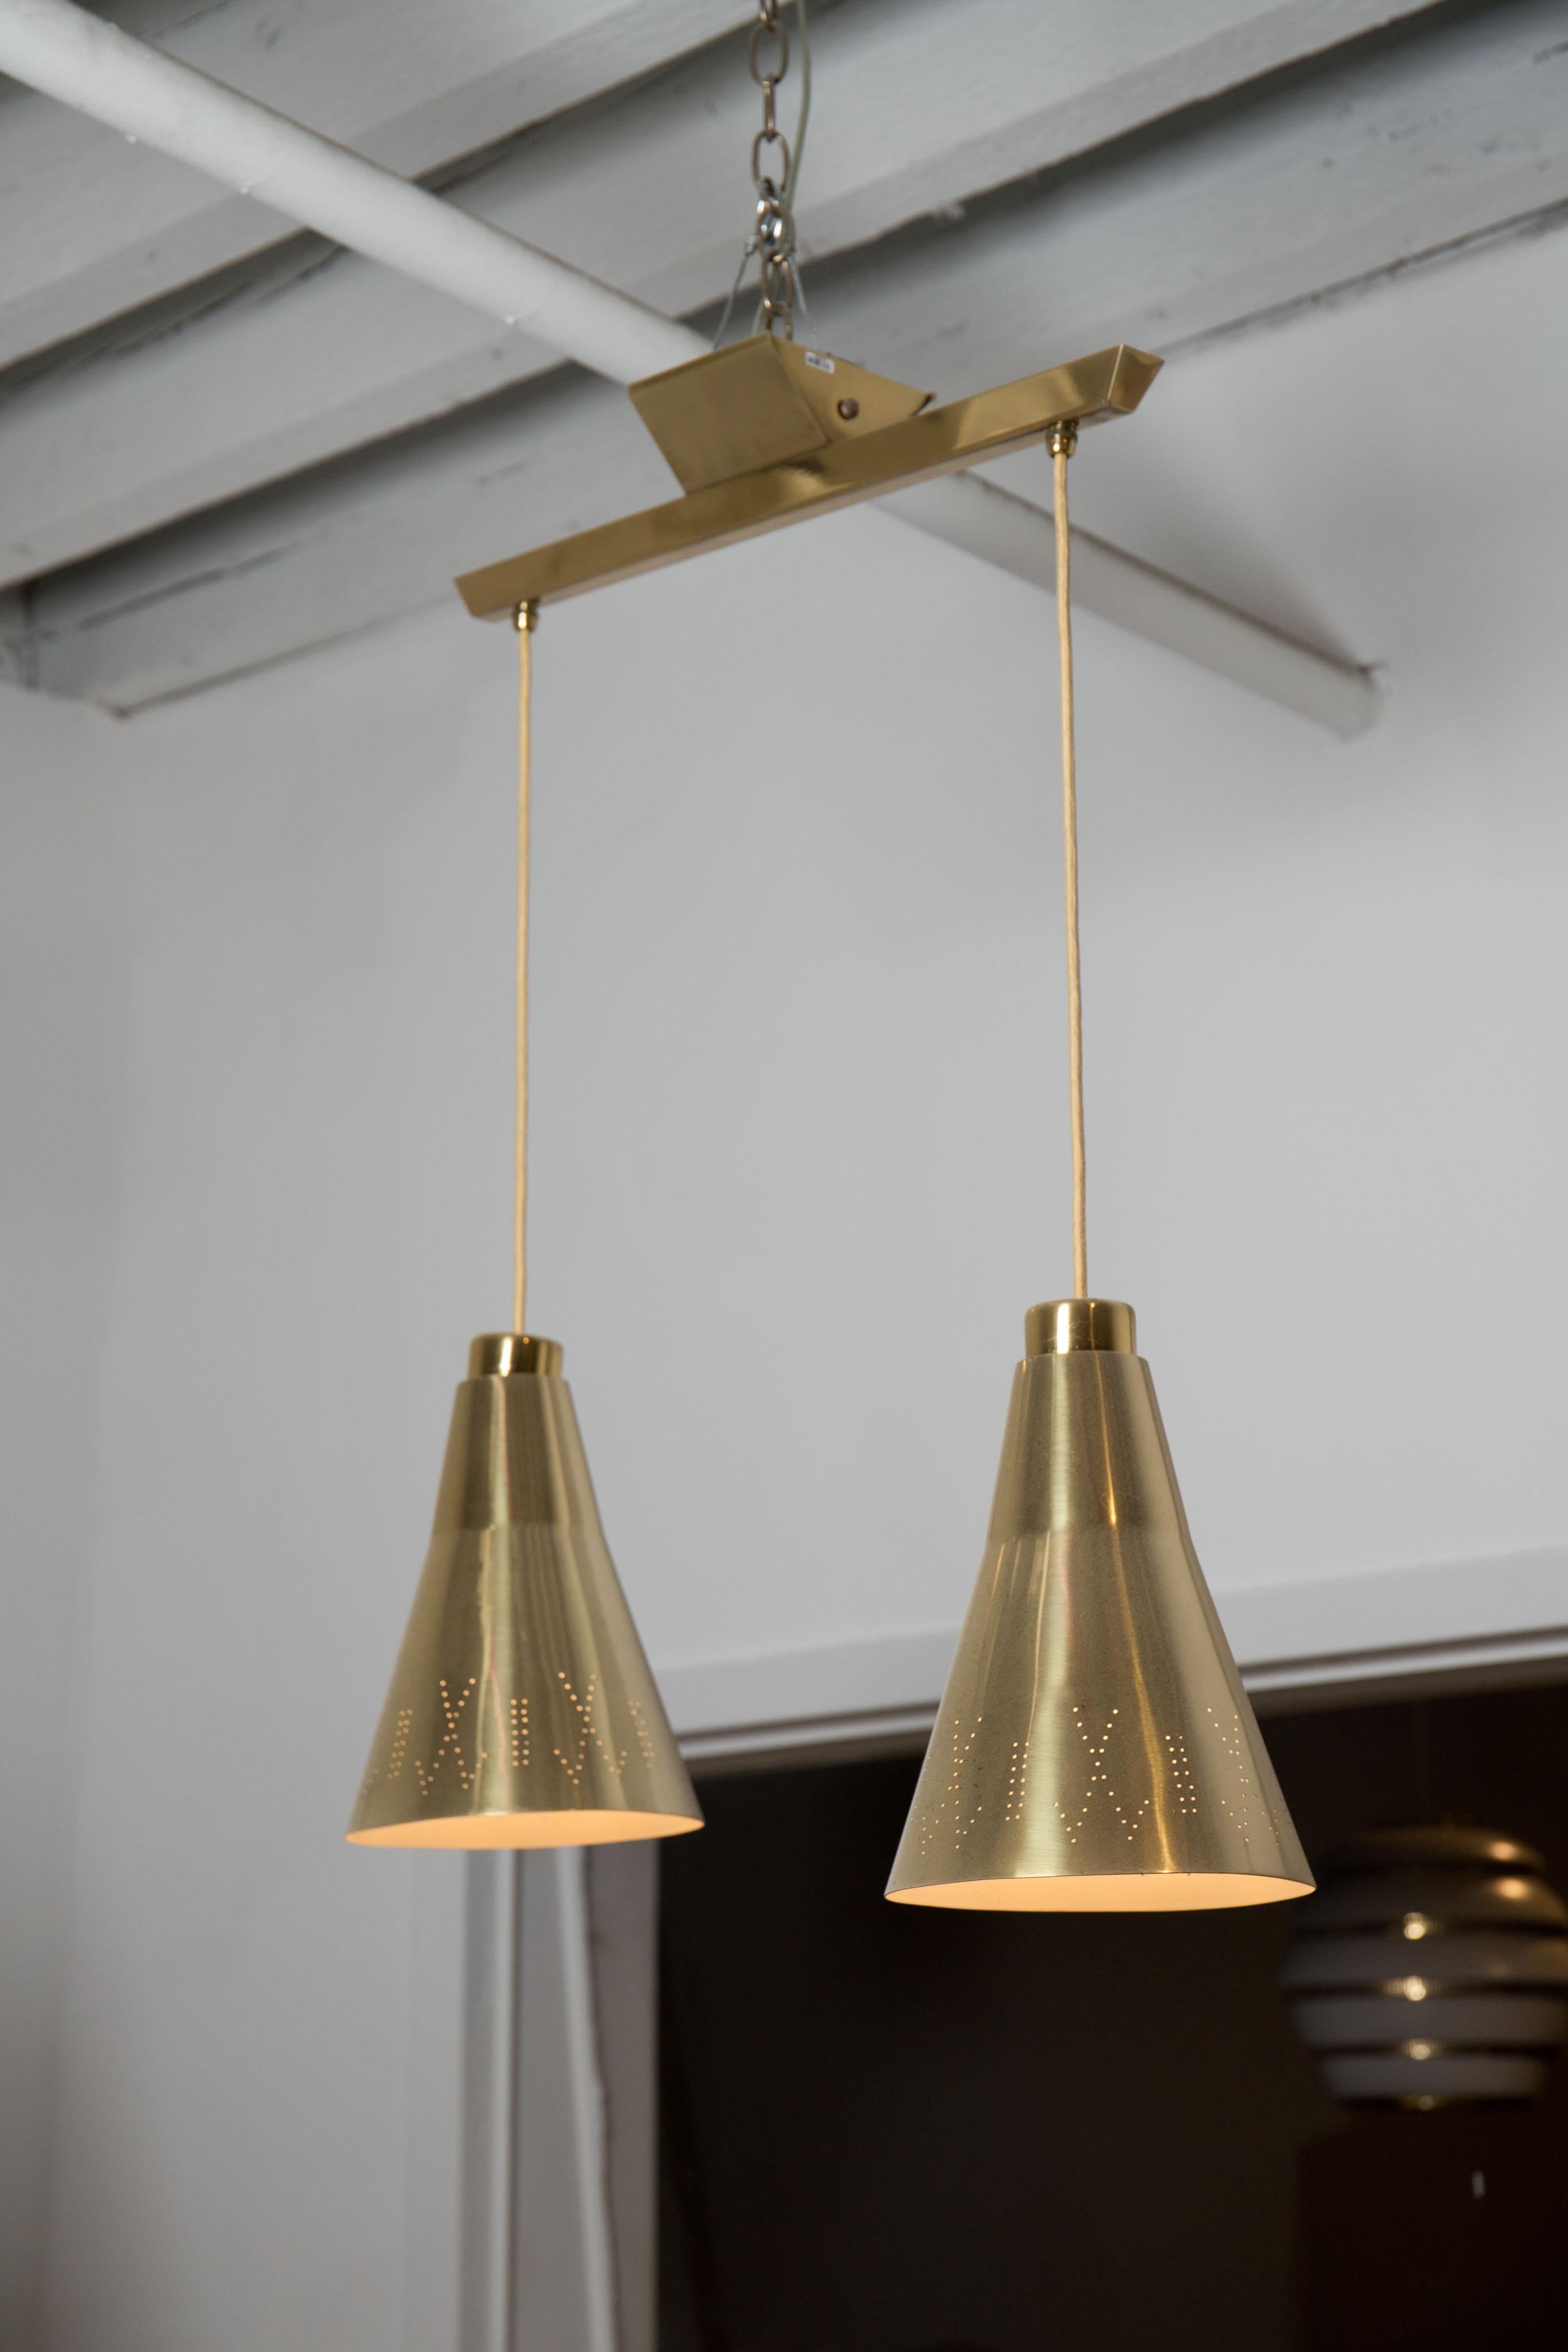 Pair of brass double pendants with perforated shades, designed by Paavo Tynel for Taito Oy, Finland, 1960s.
Brass has been polished and fixtures have been rewired.

Available to view in my gallery in Chelsea, NY.